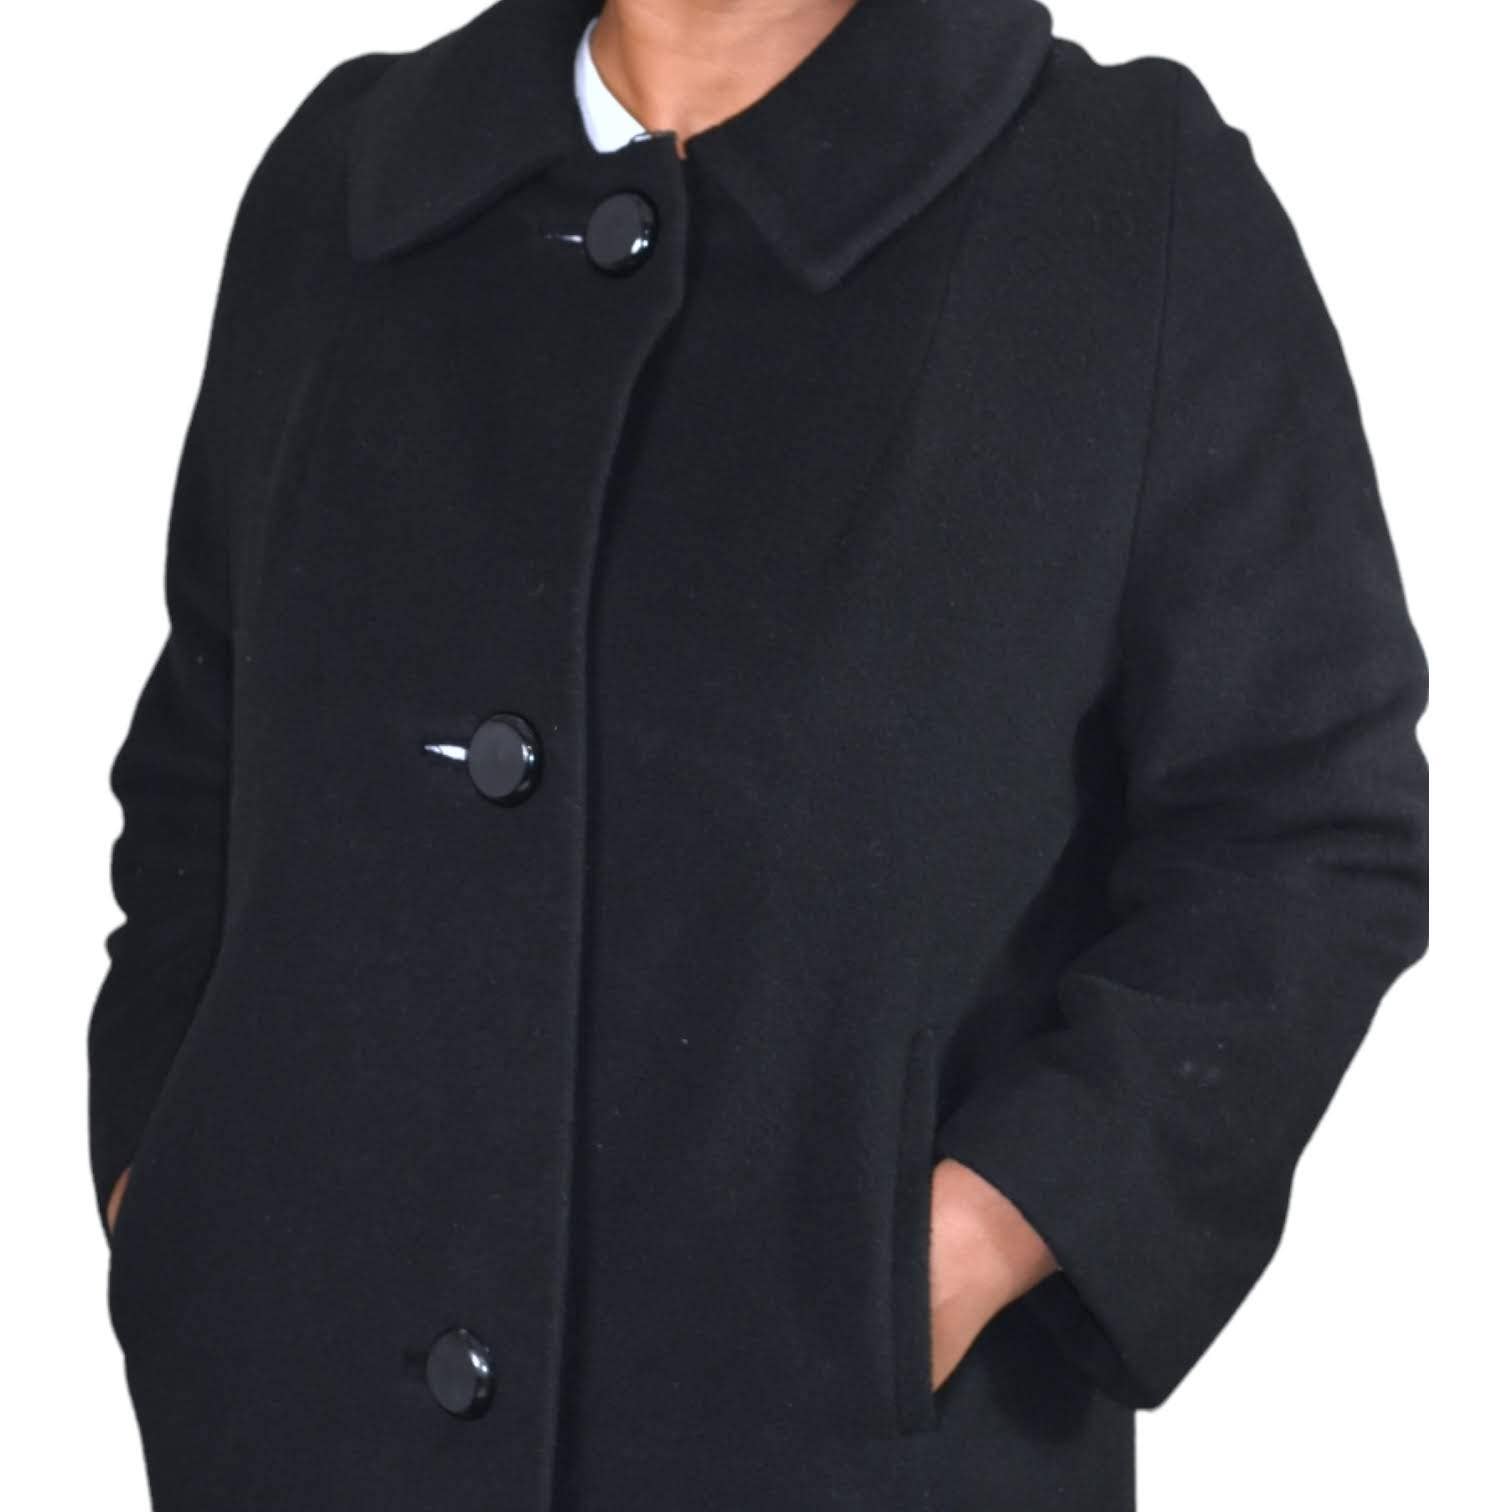 Vintage Black Coat Cashmere South Wind by Kamen Peacoat Knee Length Size Small